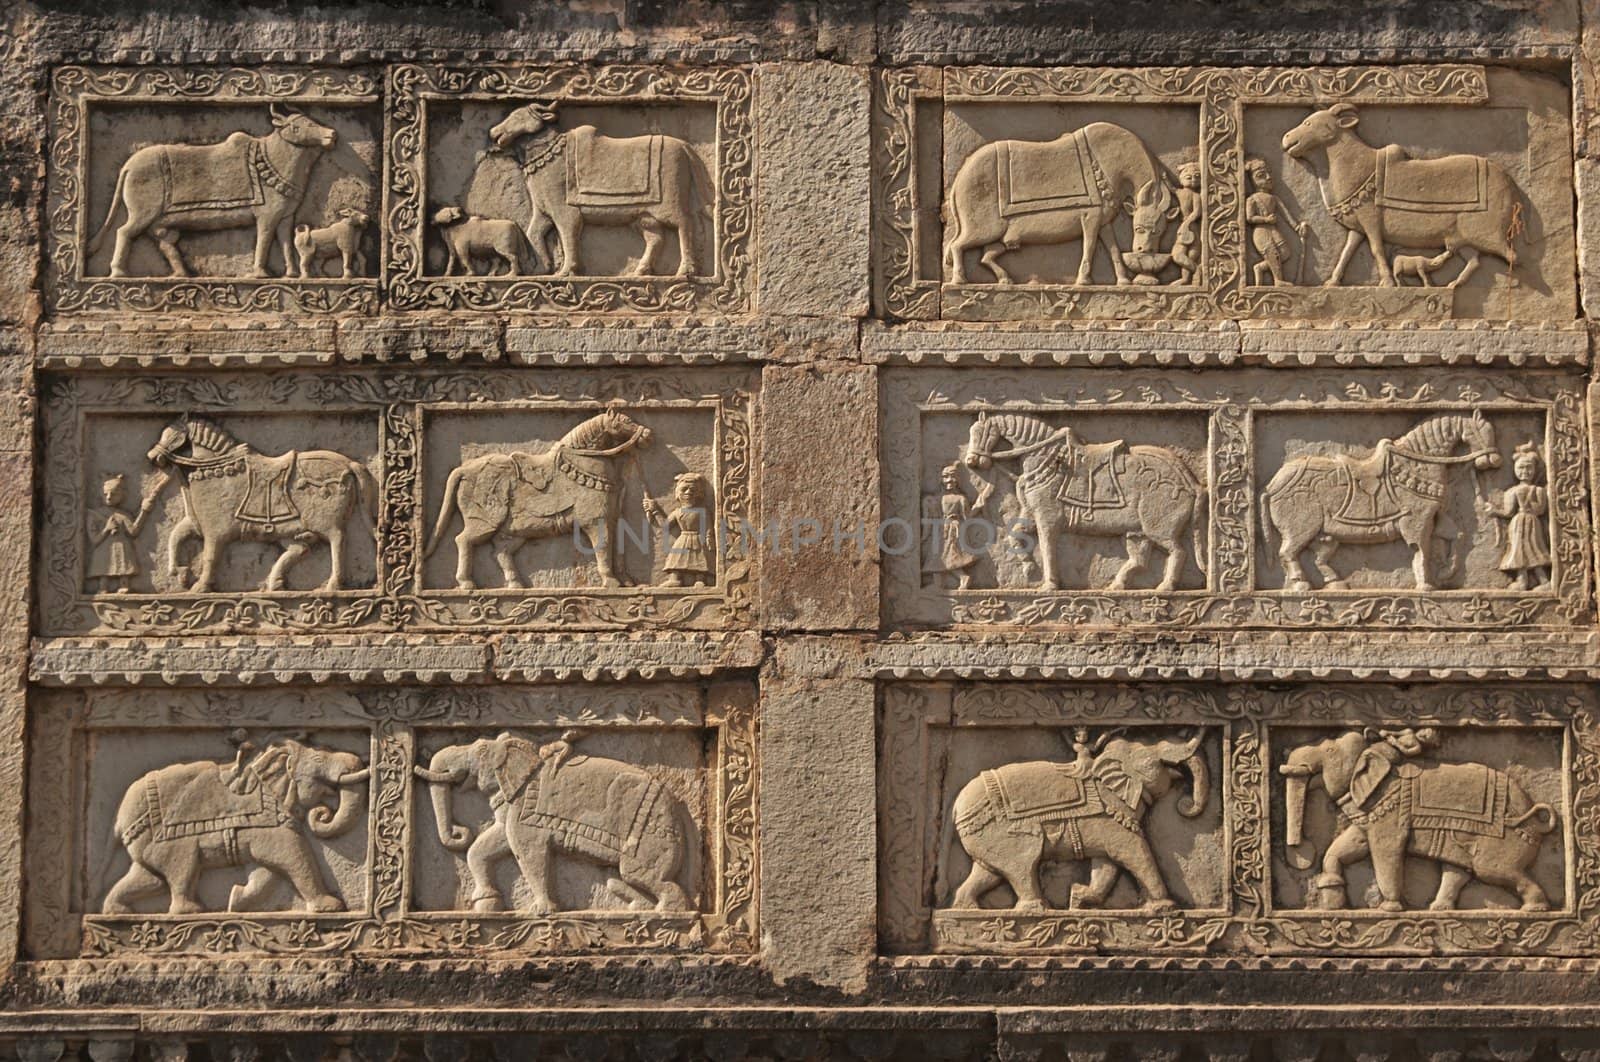 Bas relief carving of animals decorating the walls of the 84 pillared cenotaph, Bundi, Rajasthan, India